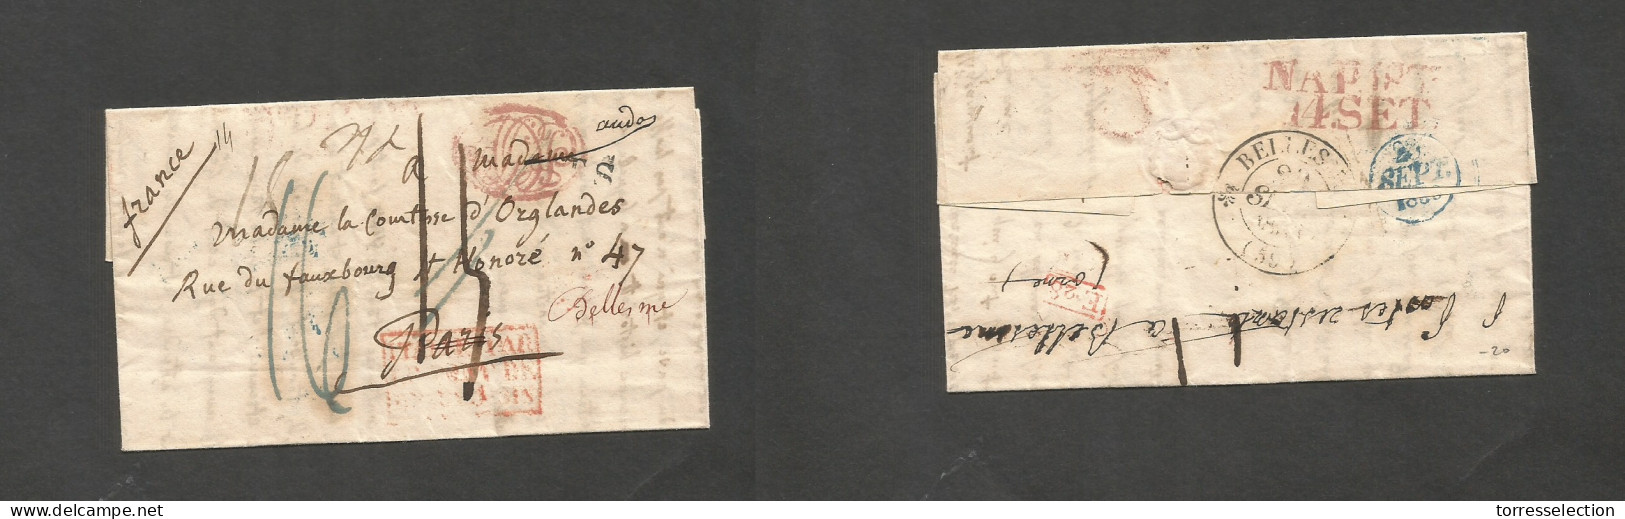 Italy - Prephilately. 1833 (14 Sept) Napoli - France, Paris, Fwded (29 Sept) Bellesme. Stampless E. With Text Several Tr - Unclassified